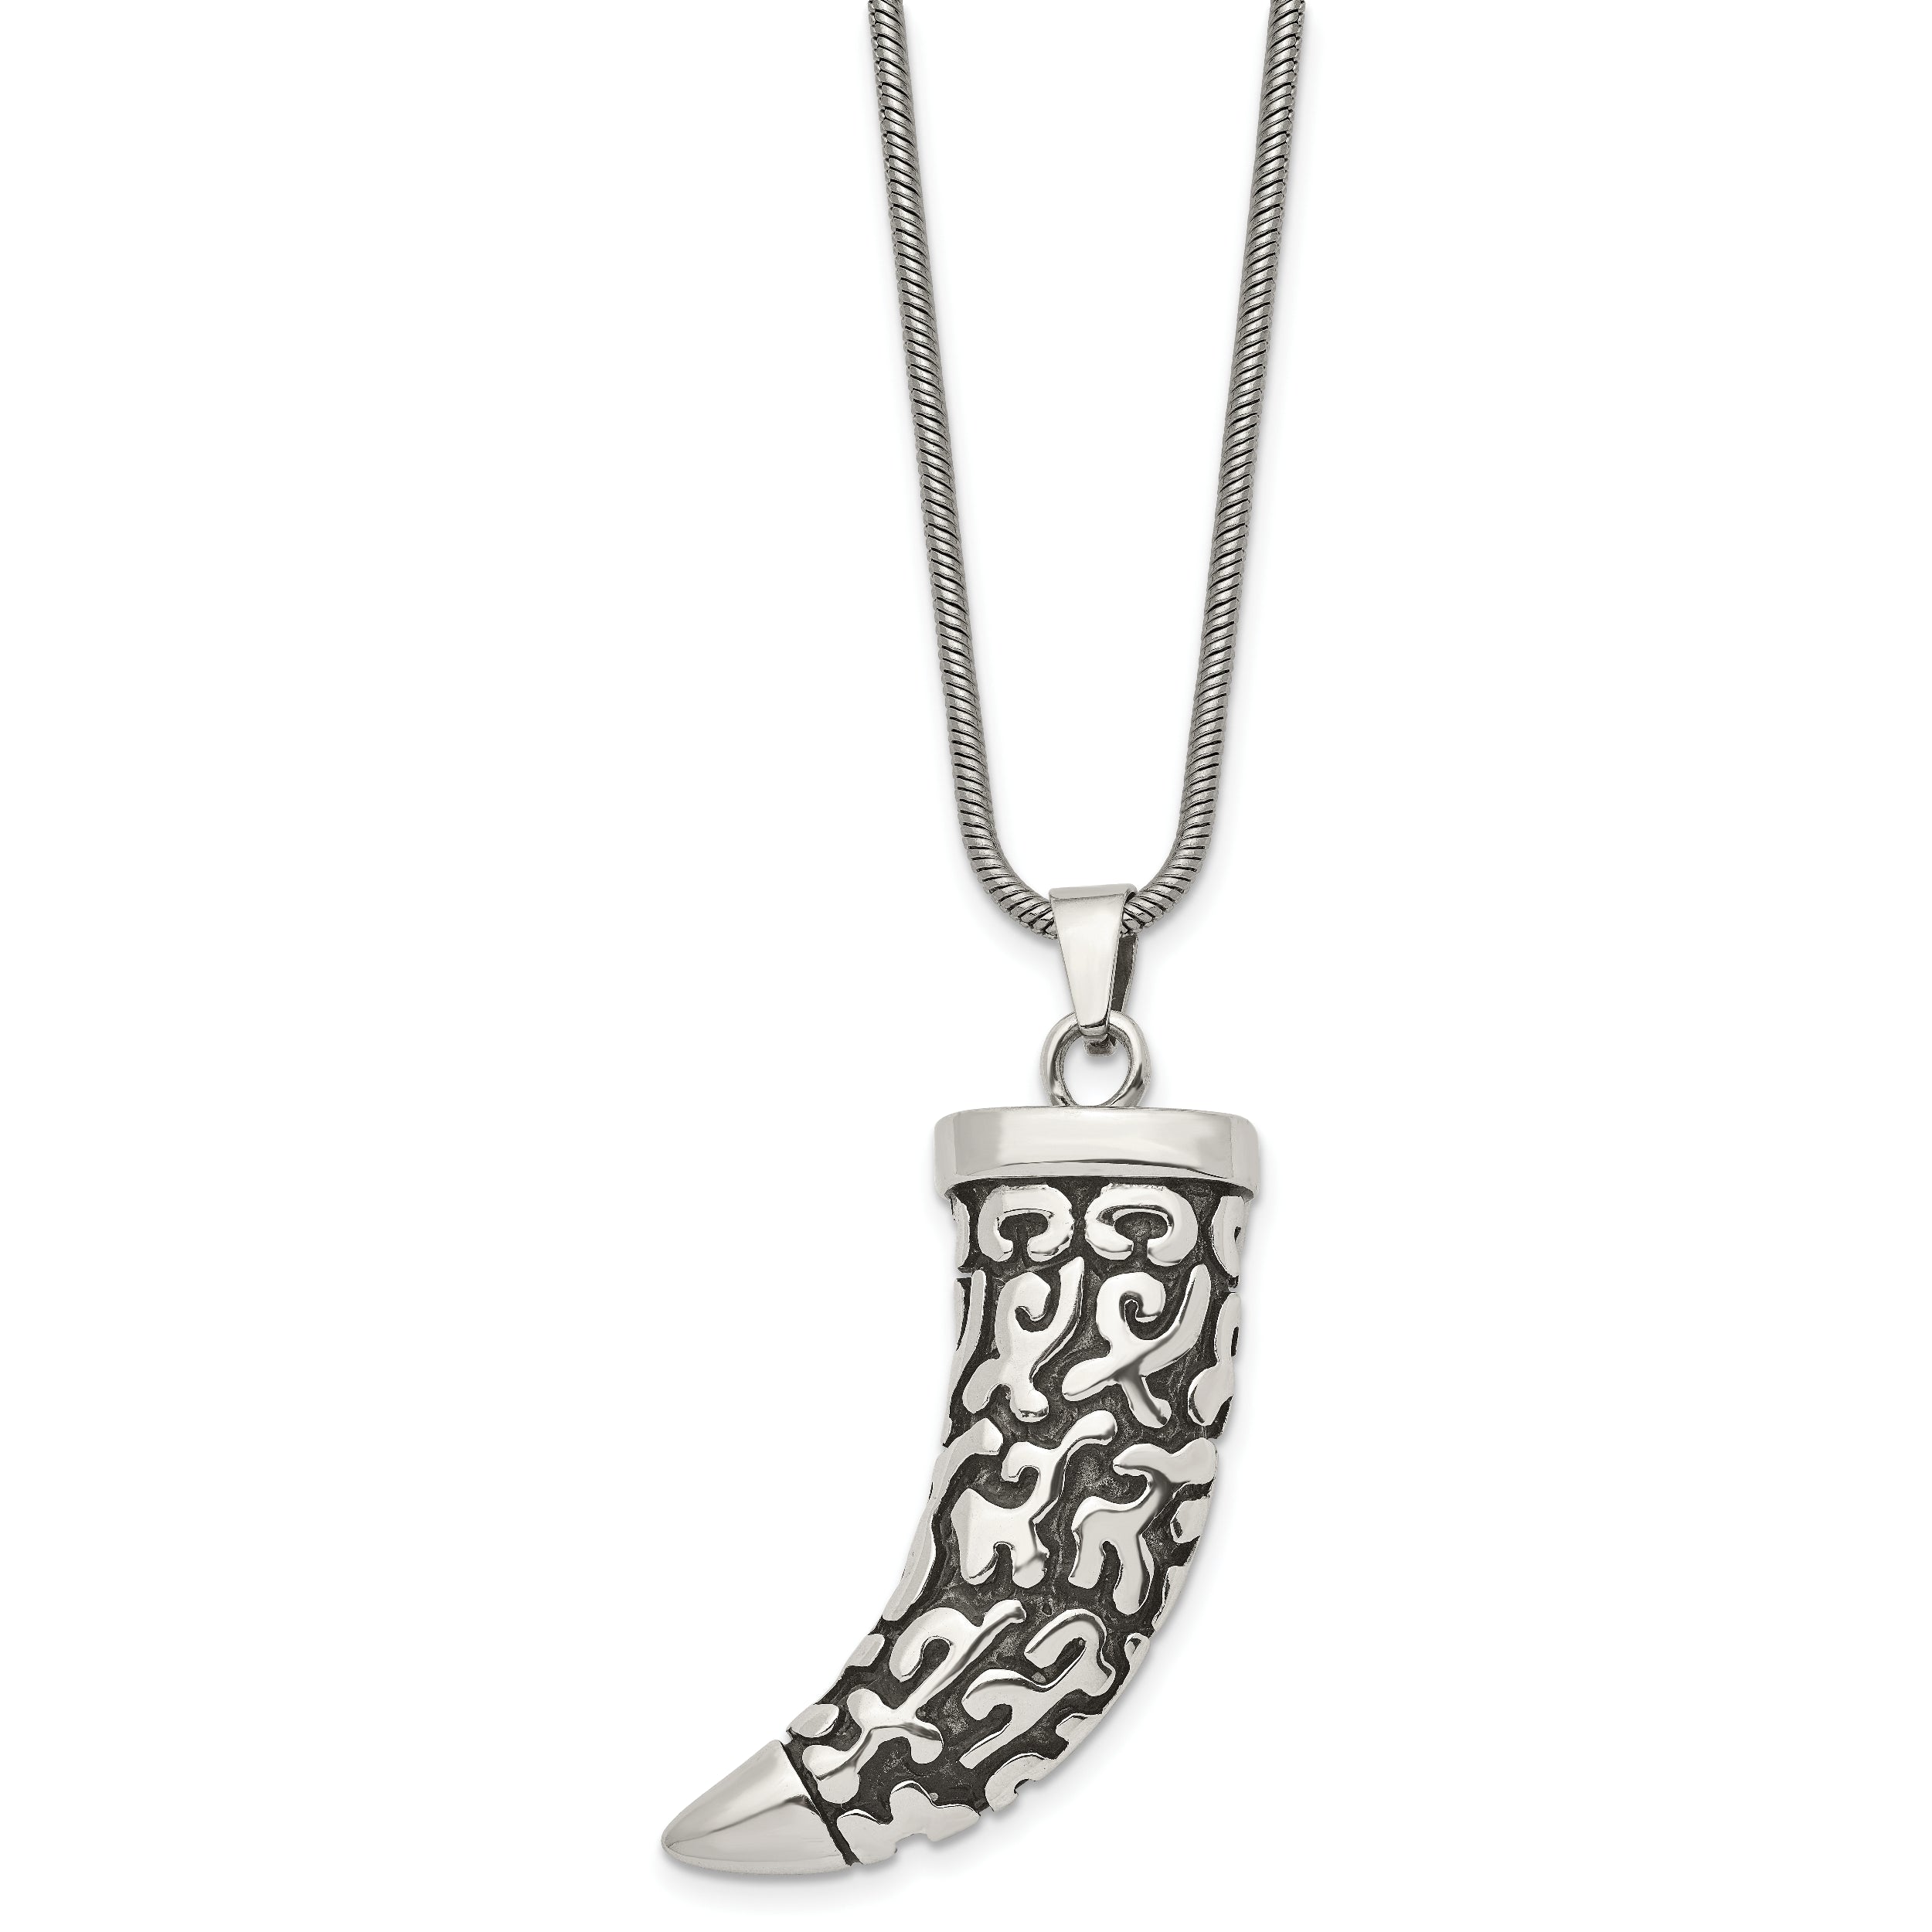 Chisel Stainless Steel Antiqued Polished and Textured Swirl Design Claw Pendant on a 24 inch Rope Chain Necklace